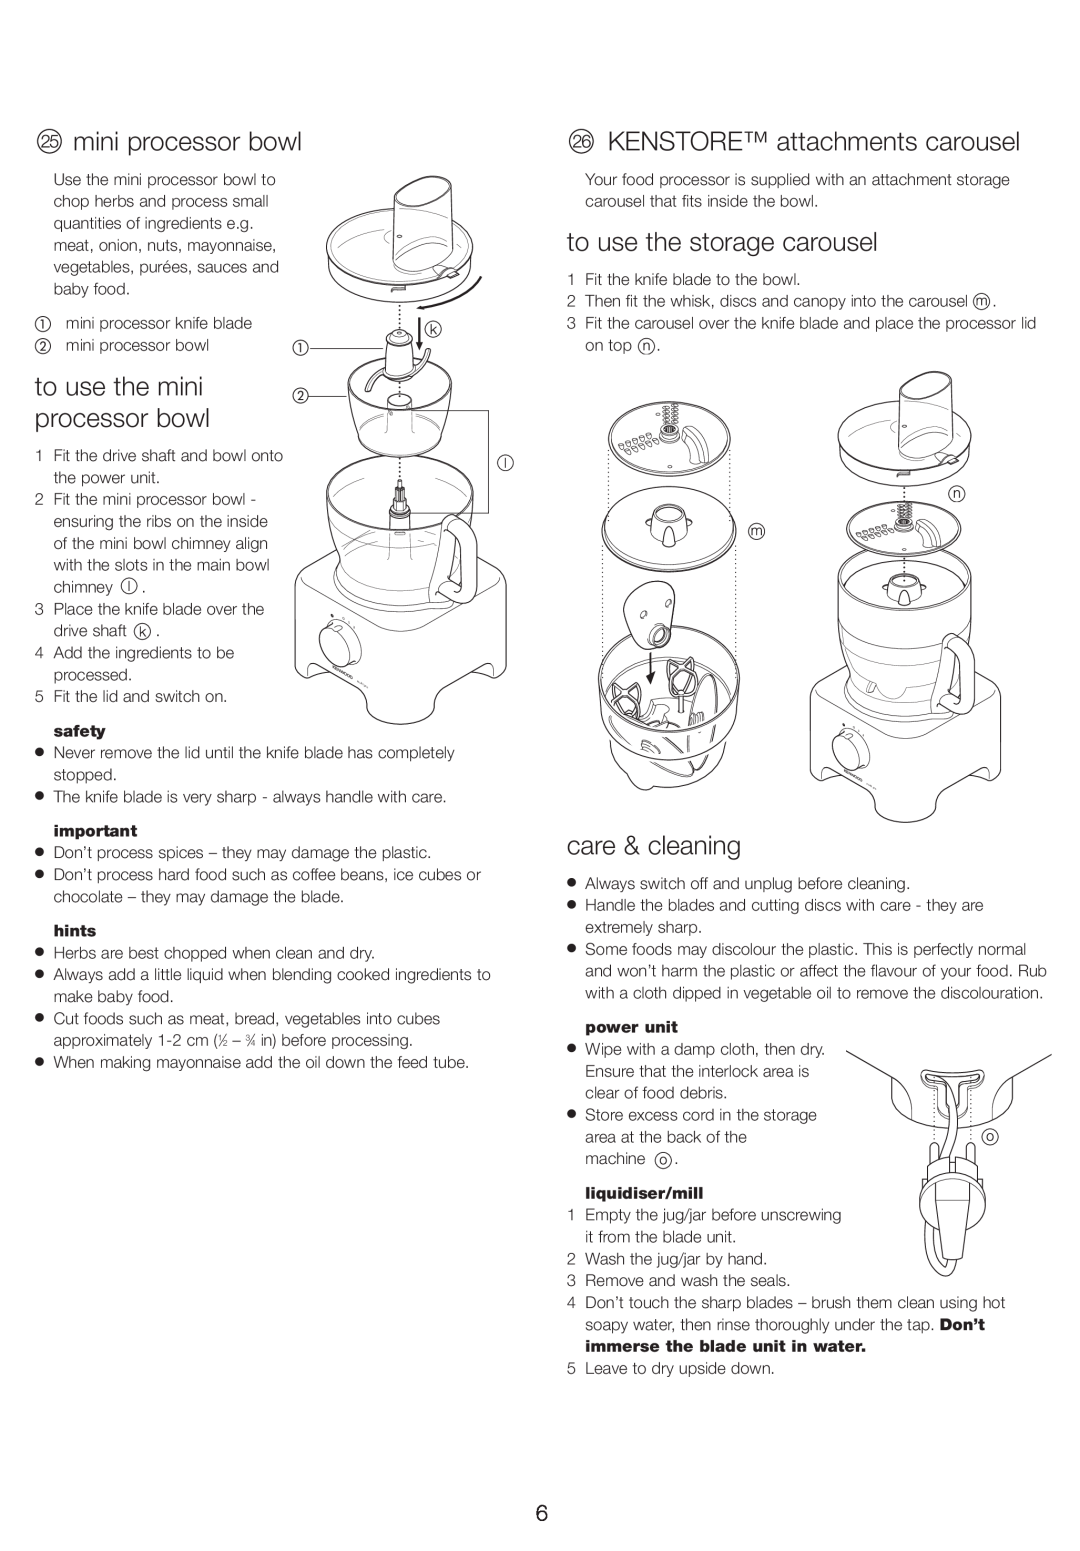 Kenwood FP710 manual to use the mini processor bowl, KENSTORE attachments carousel, to use the storage carousel, safety 